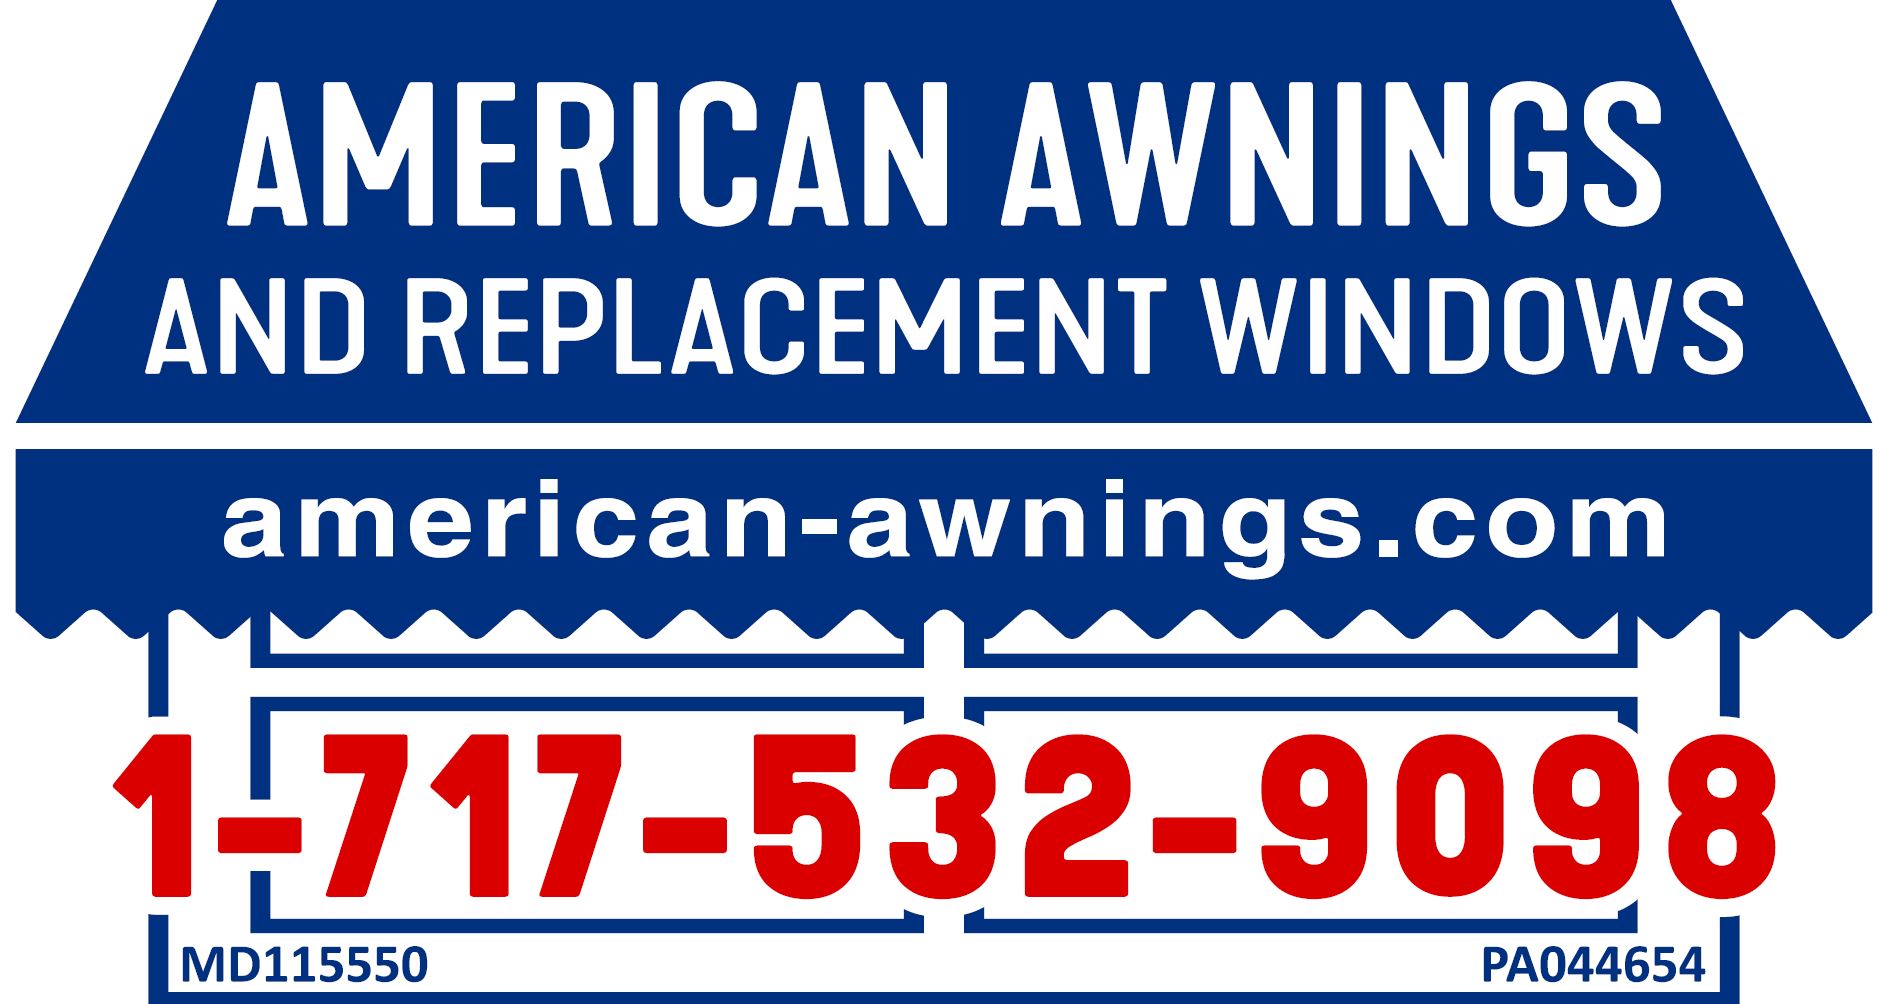 American Awnings and Replacement Windows Logo